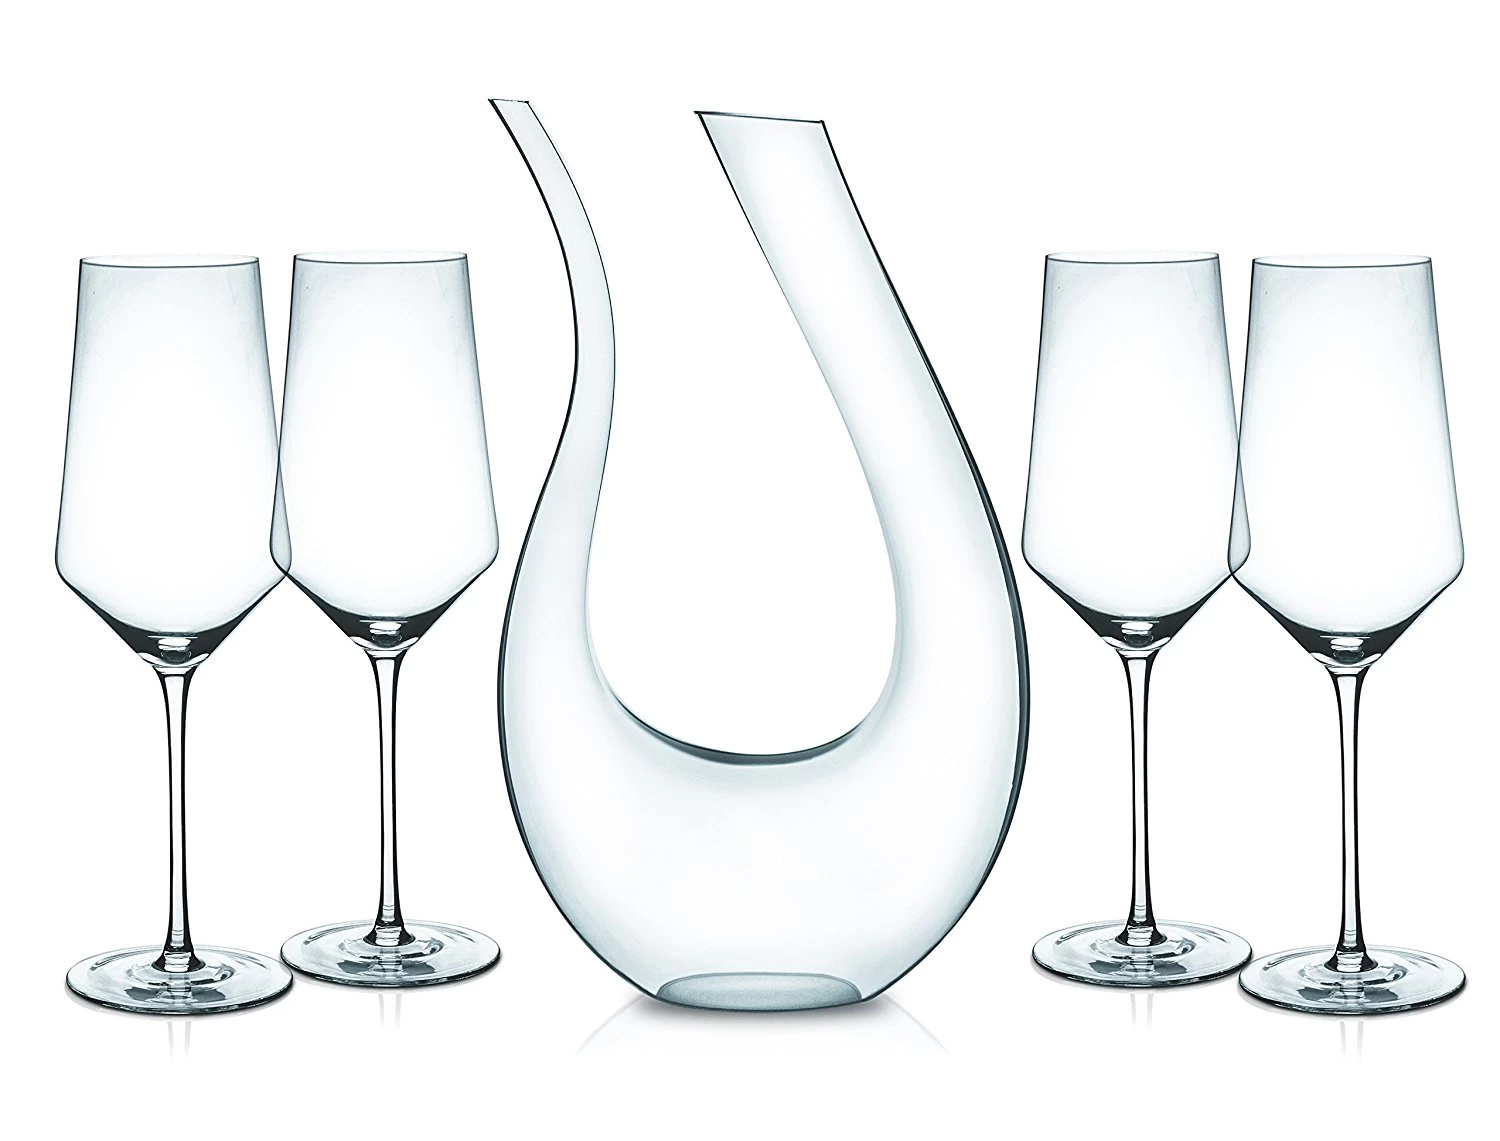 04 Hot Selling Cheap Price Customized Clear Wine Glass Set Manufacturer From China